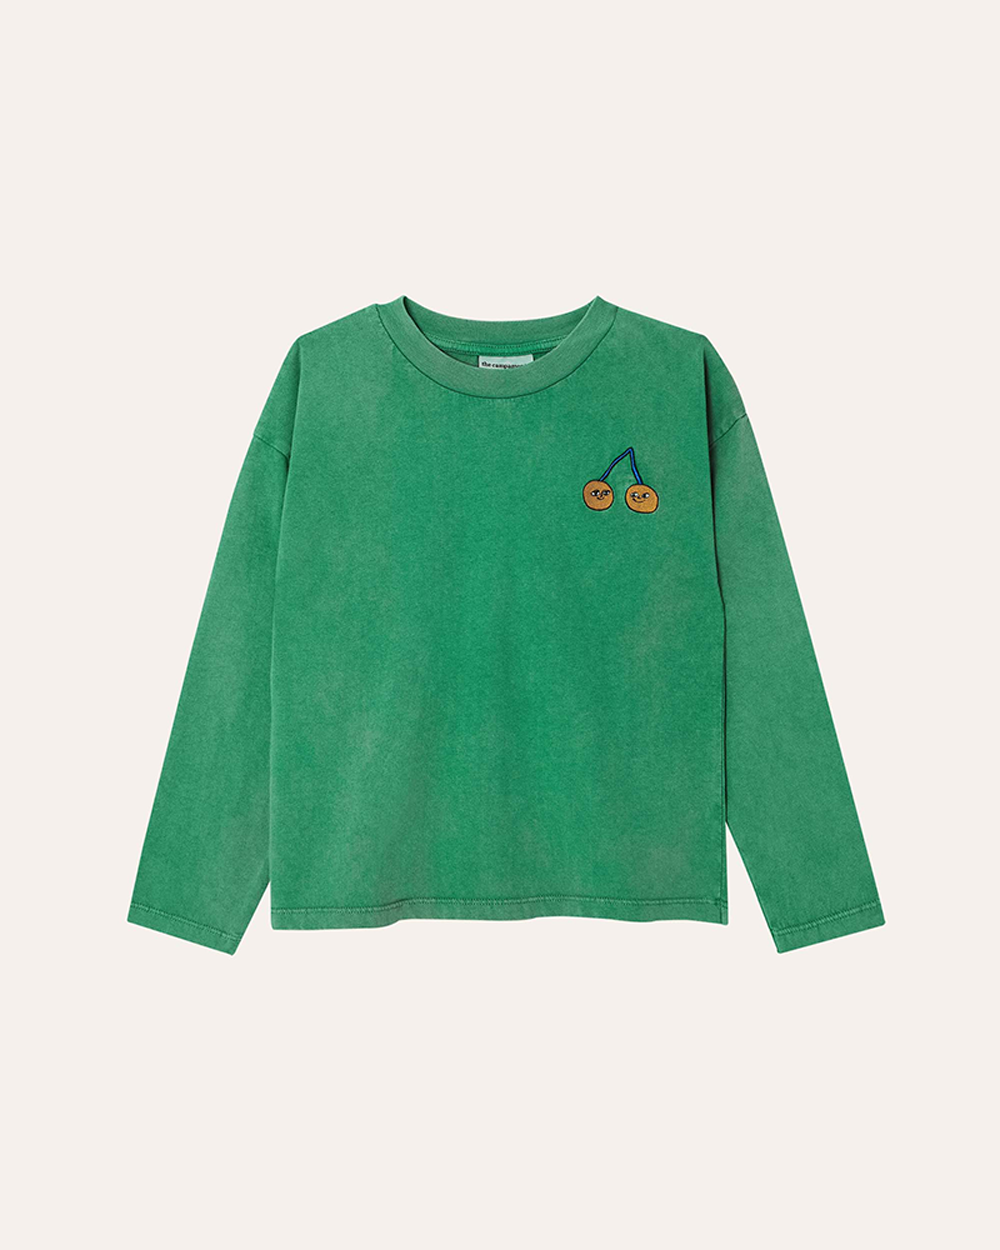 [ THE CAMPAMENTO ] CHERRIES EMBROIDERY LONG SLEEVES KIDS TSHIRT [7-8Y]